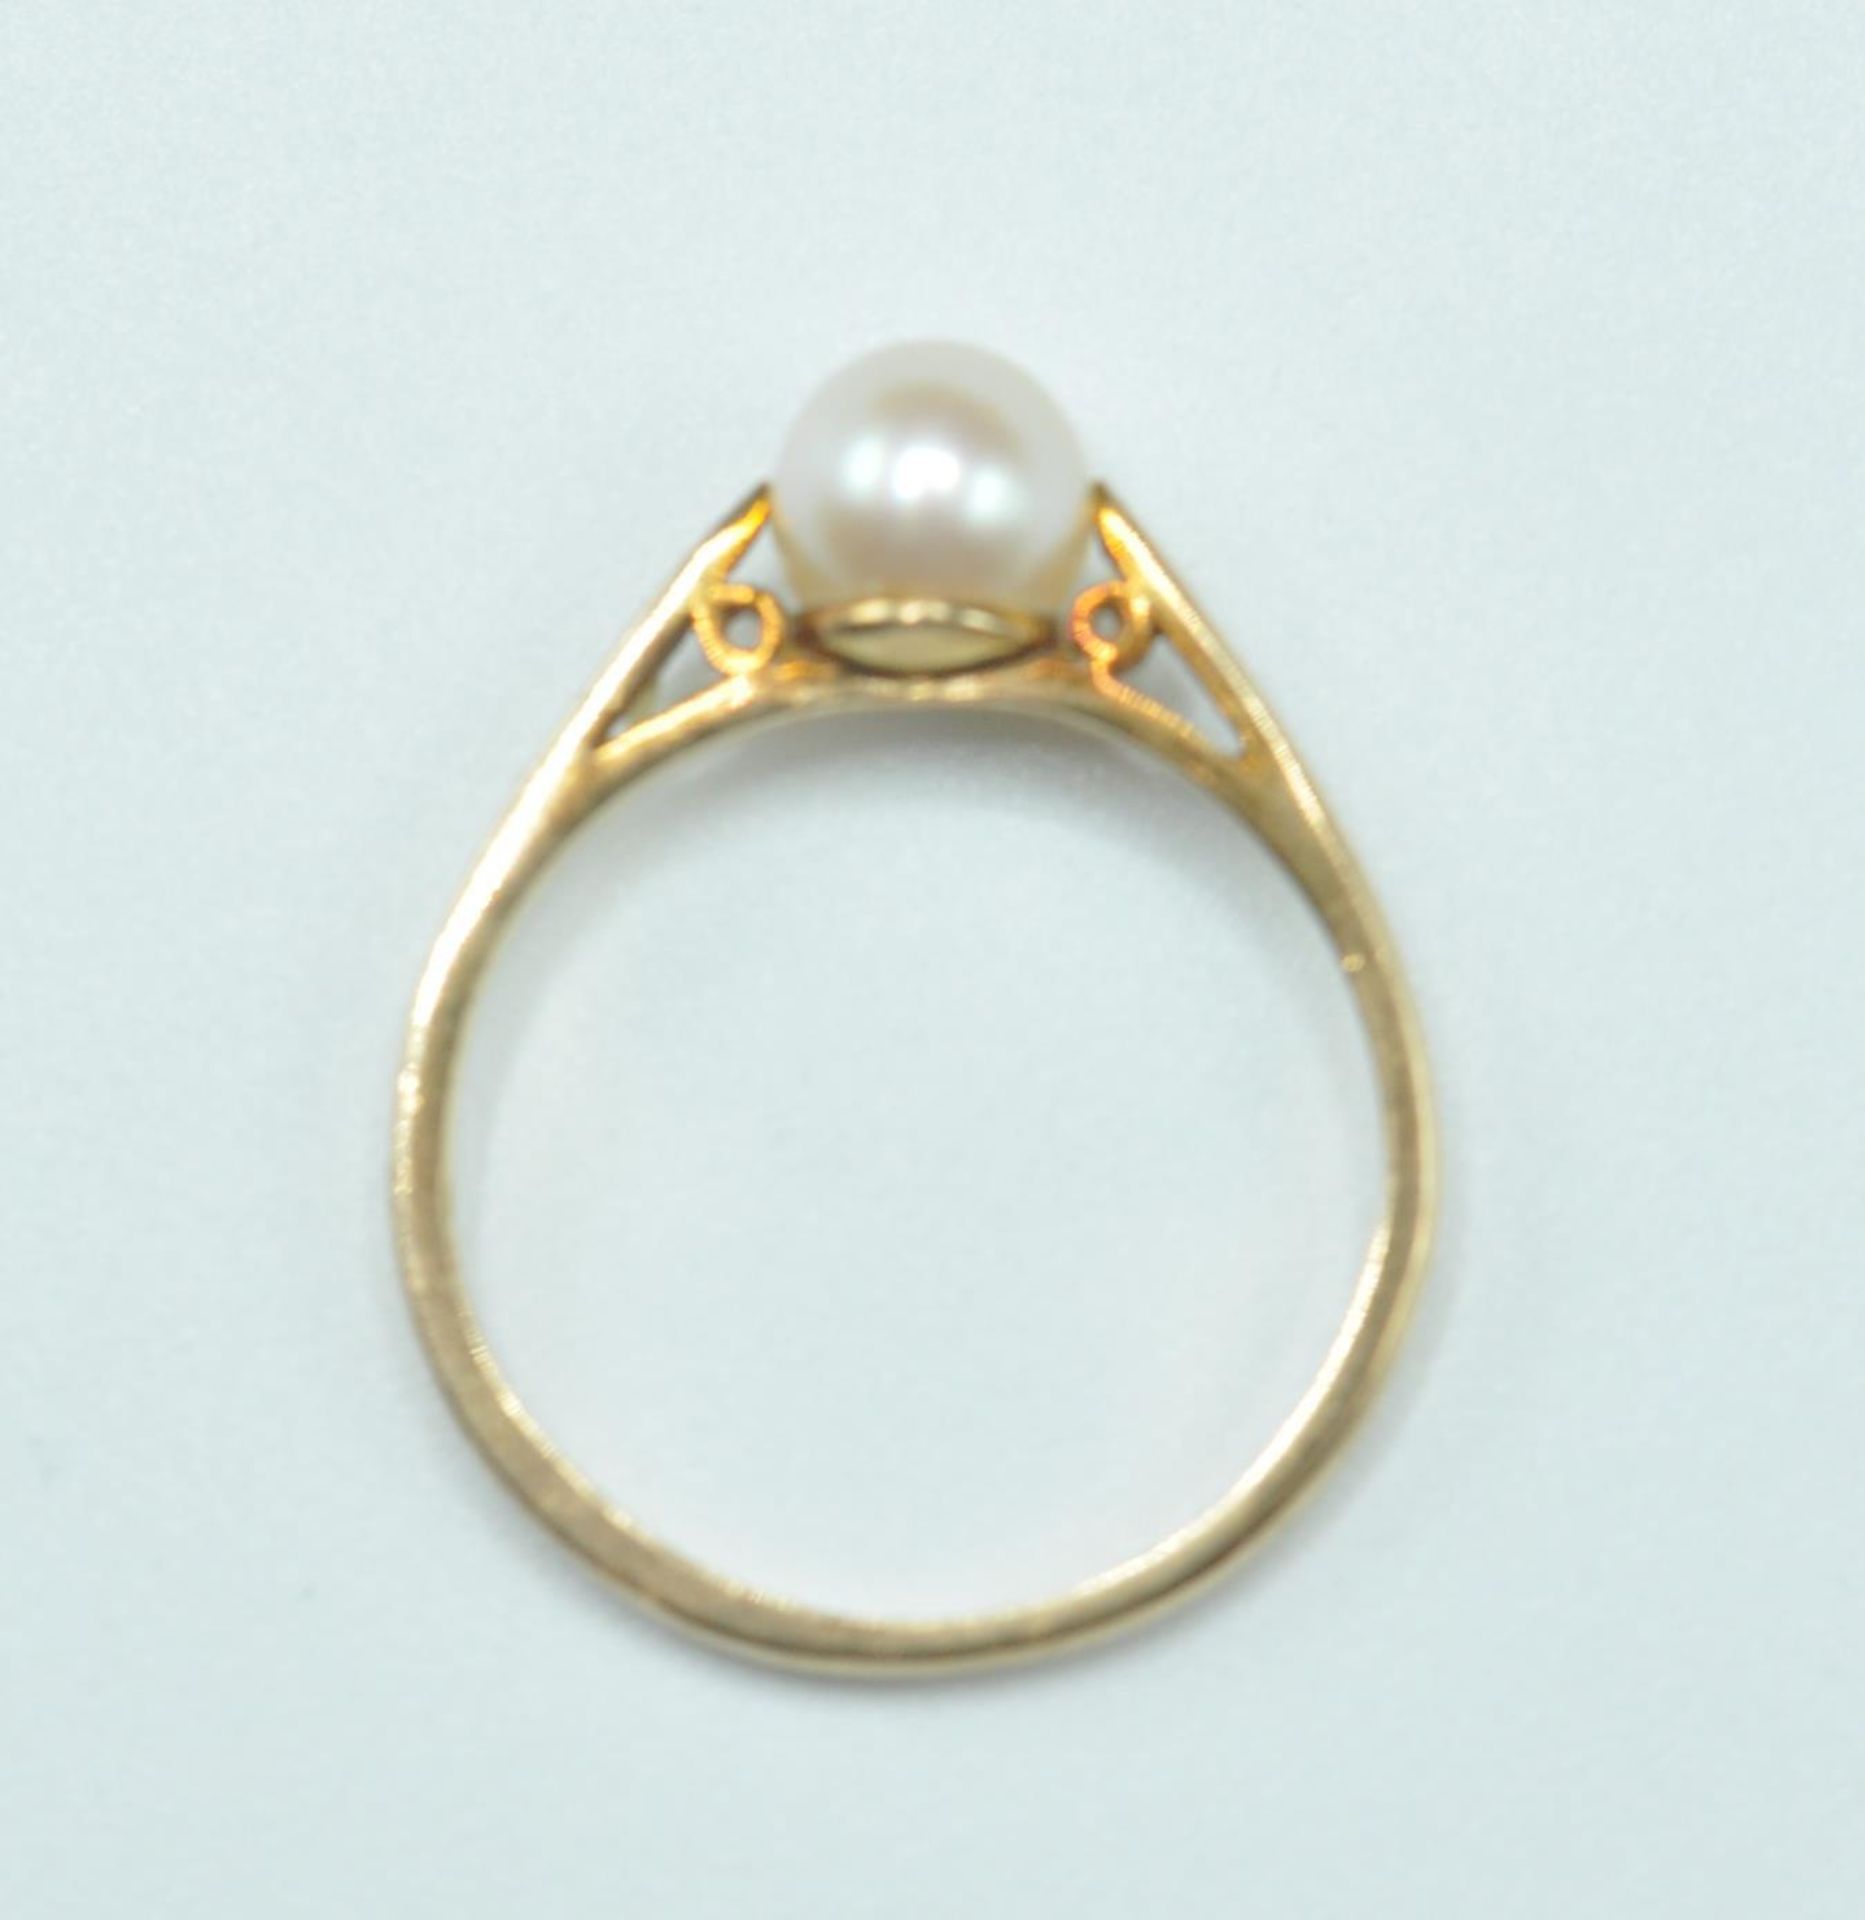 9CT GOLD AND SINGLE PEARL HALLMARKED RING - Image 6 of 6